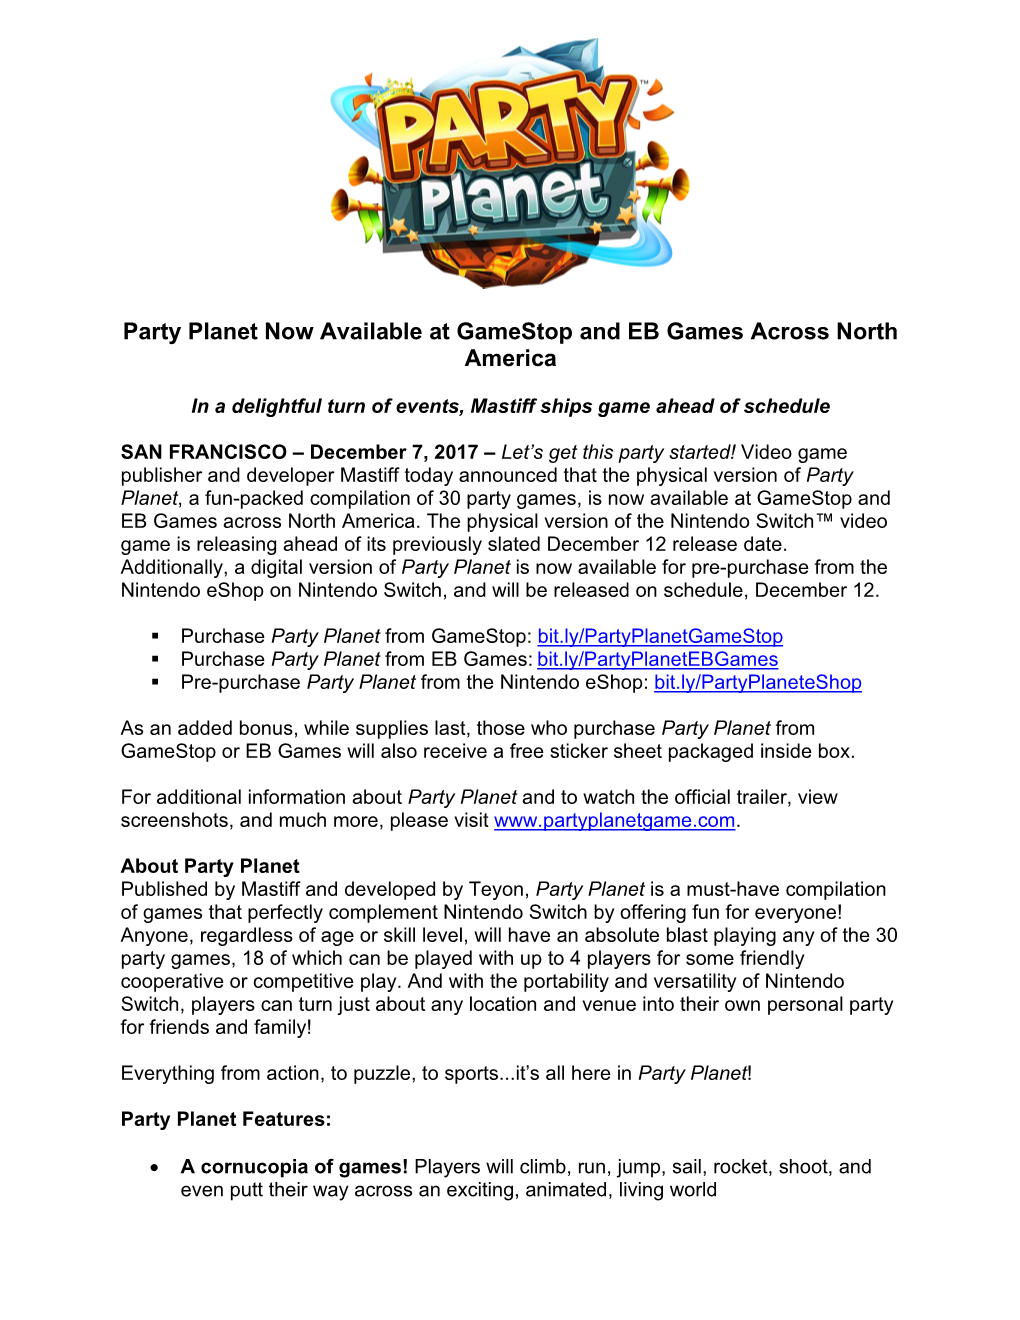 Party Planet Now Available at Gamestop and EB Games Across North America